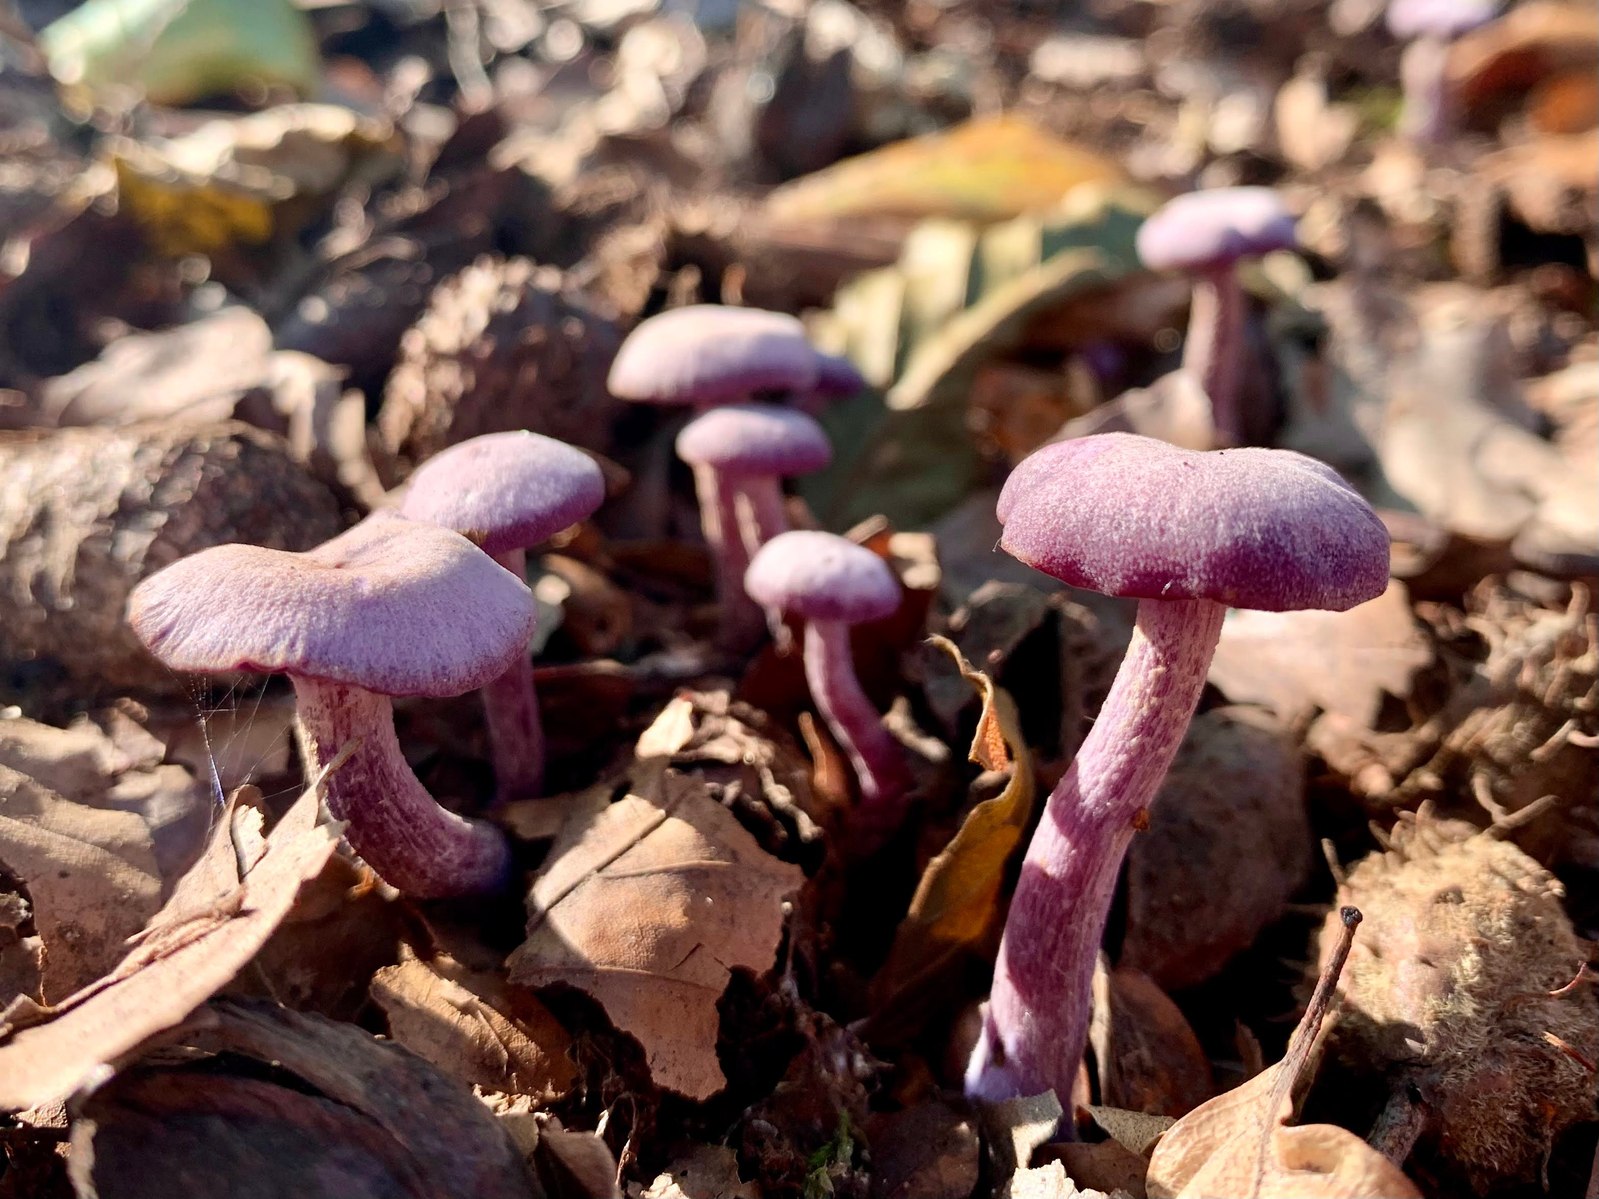 Small purple mushrooms emerging from a bed of autumn leaf litter, adding a pop of color to the forest floor.